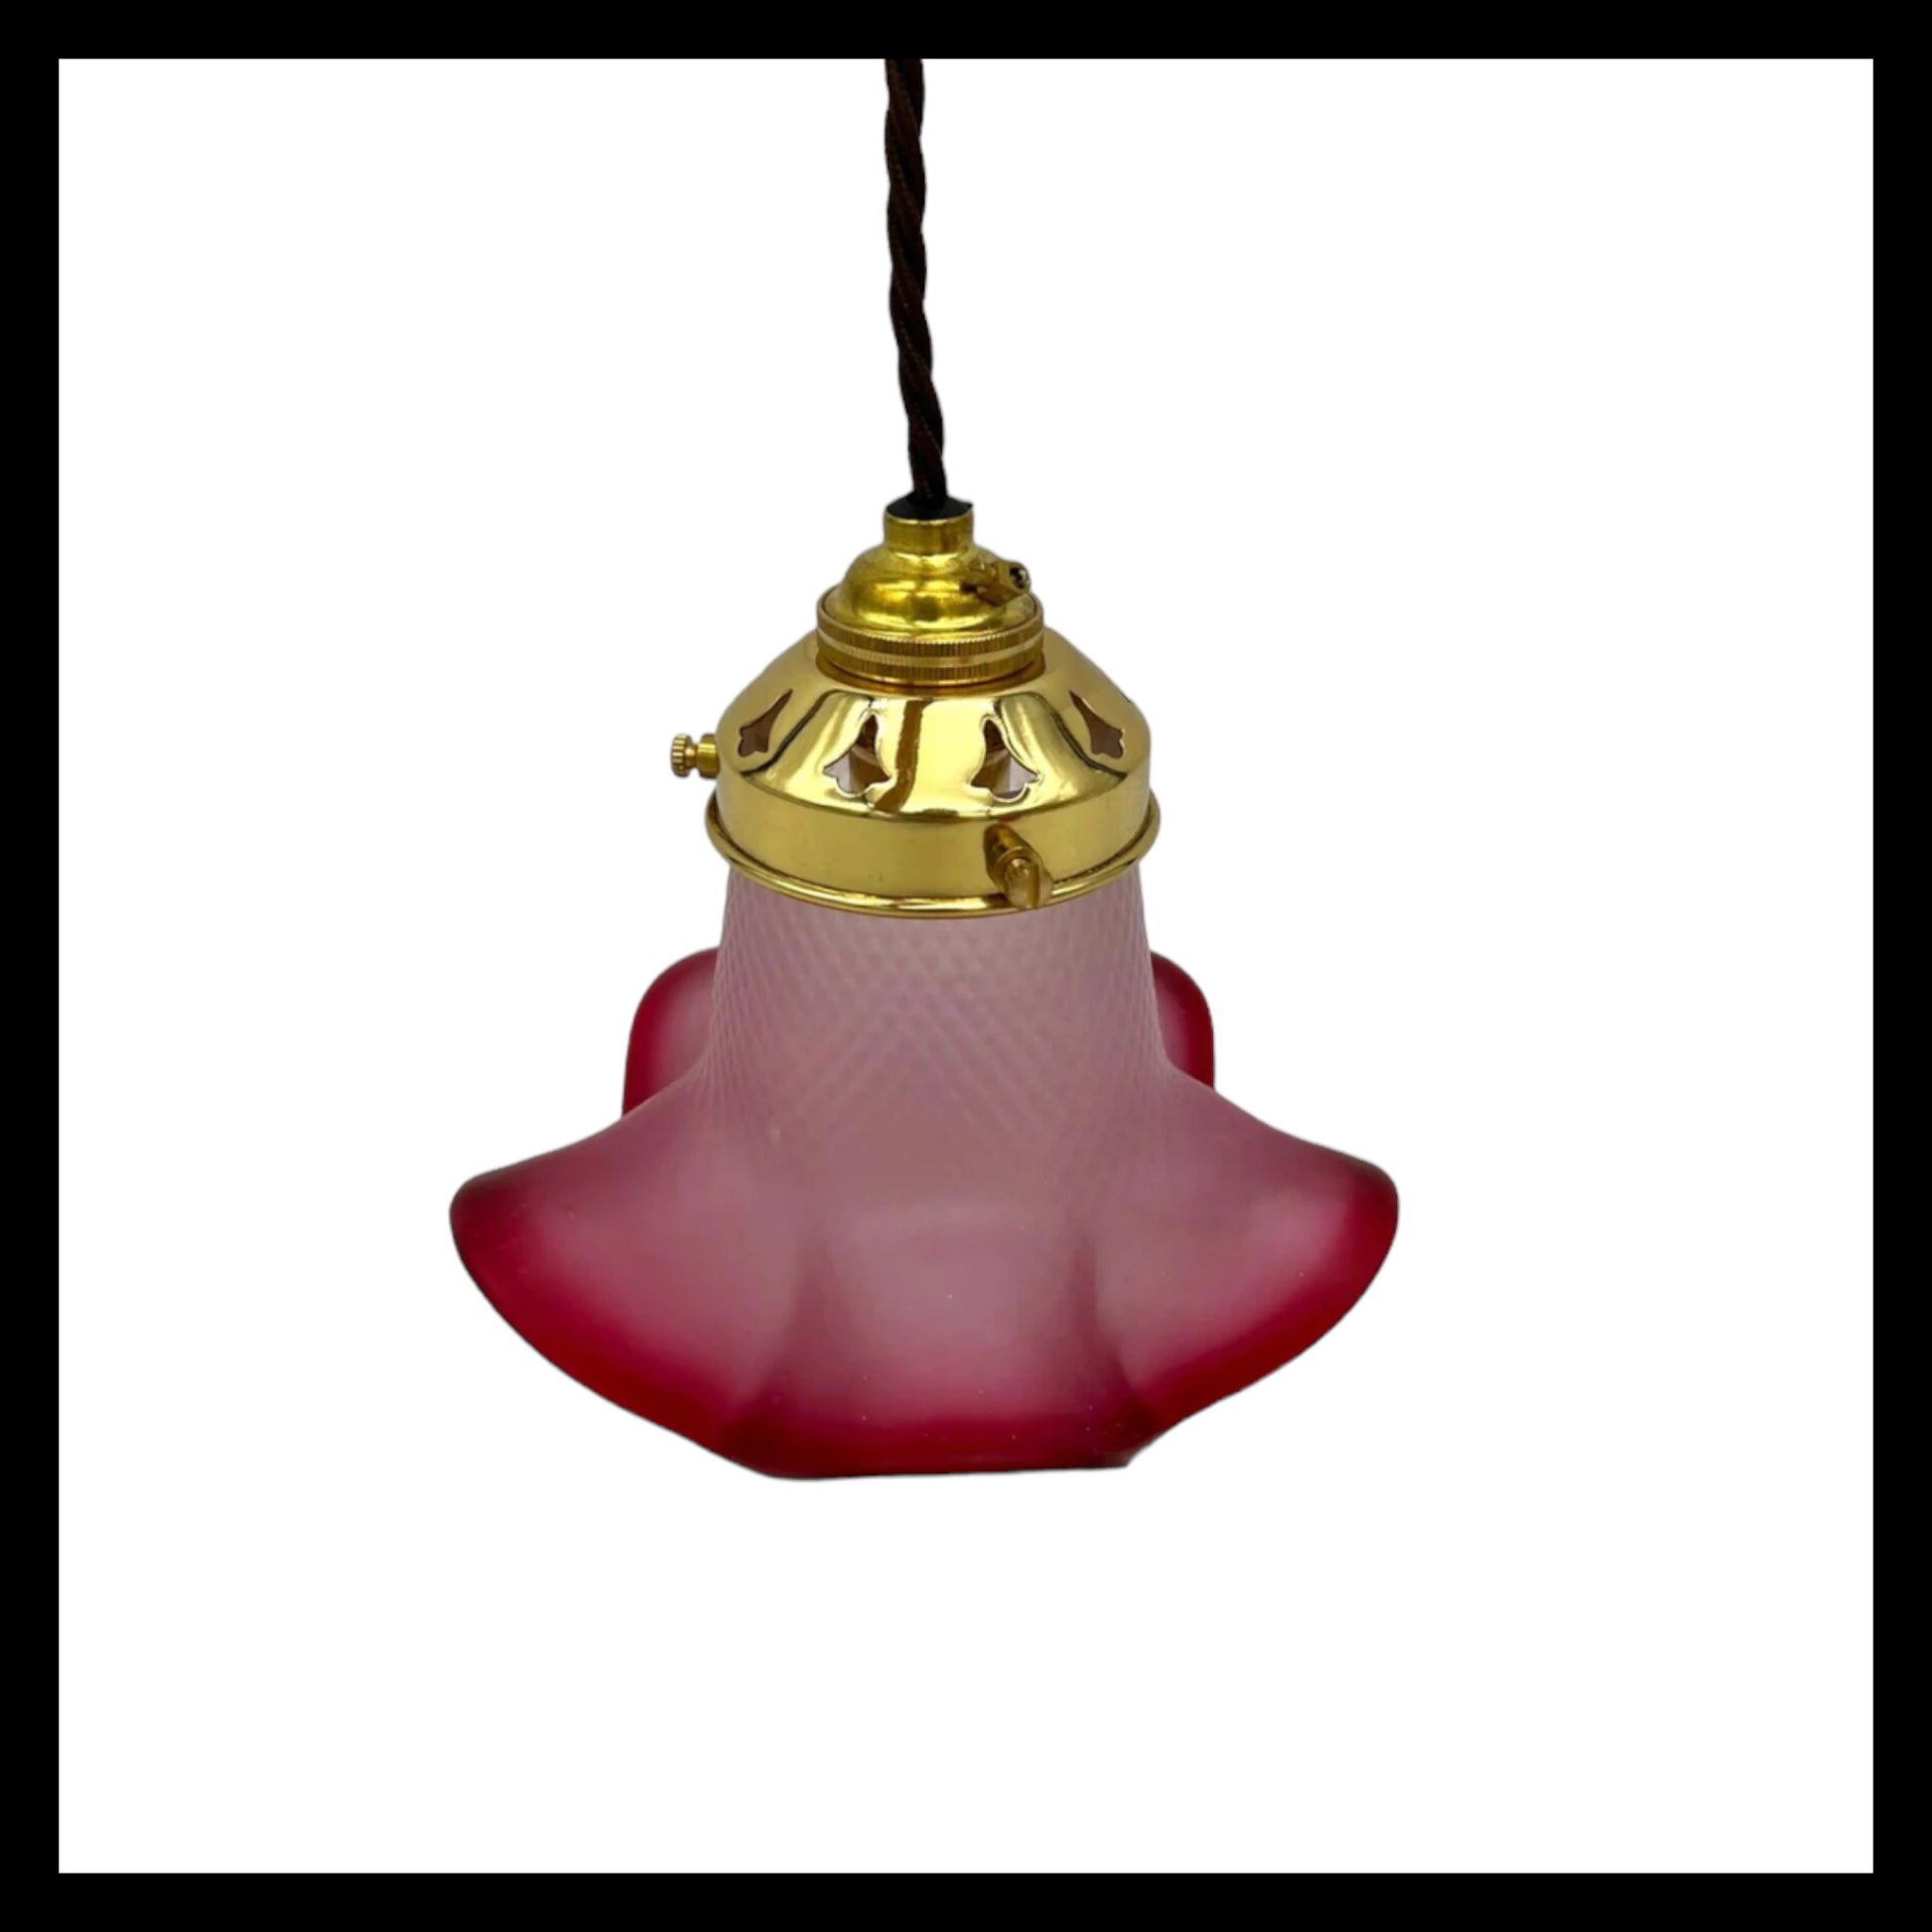 French vintage glass pink ceiling pendant light lampshade sold by All Things French Store